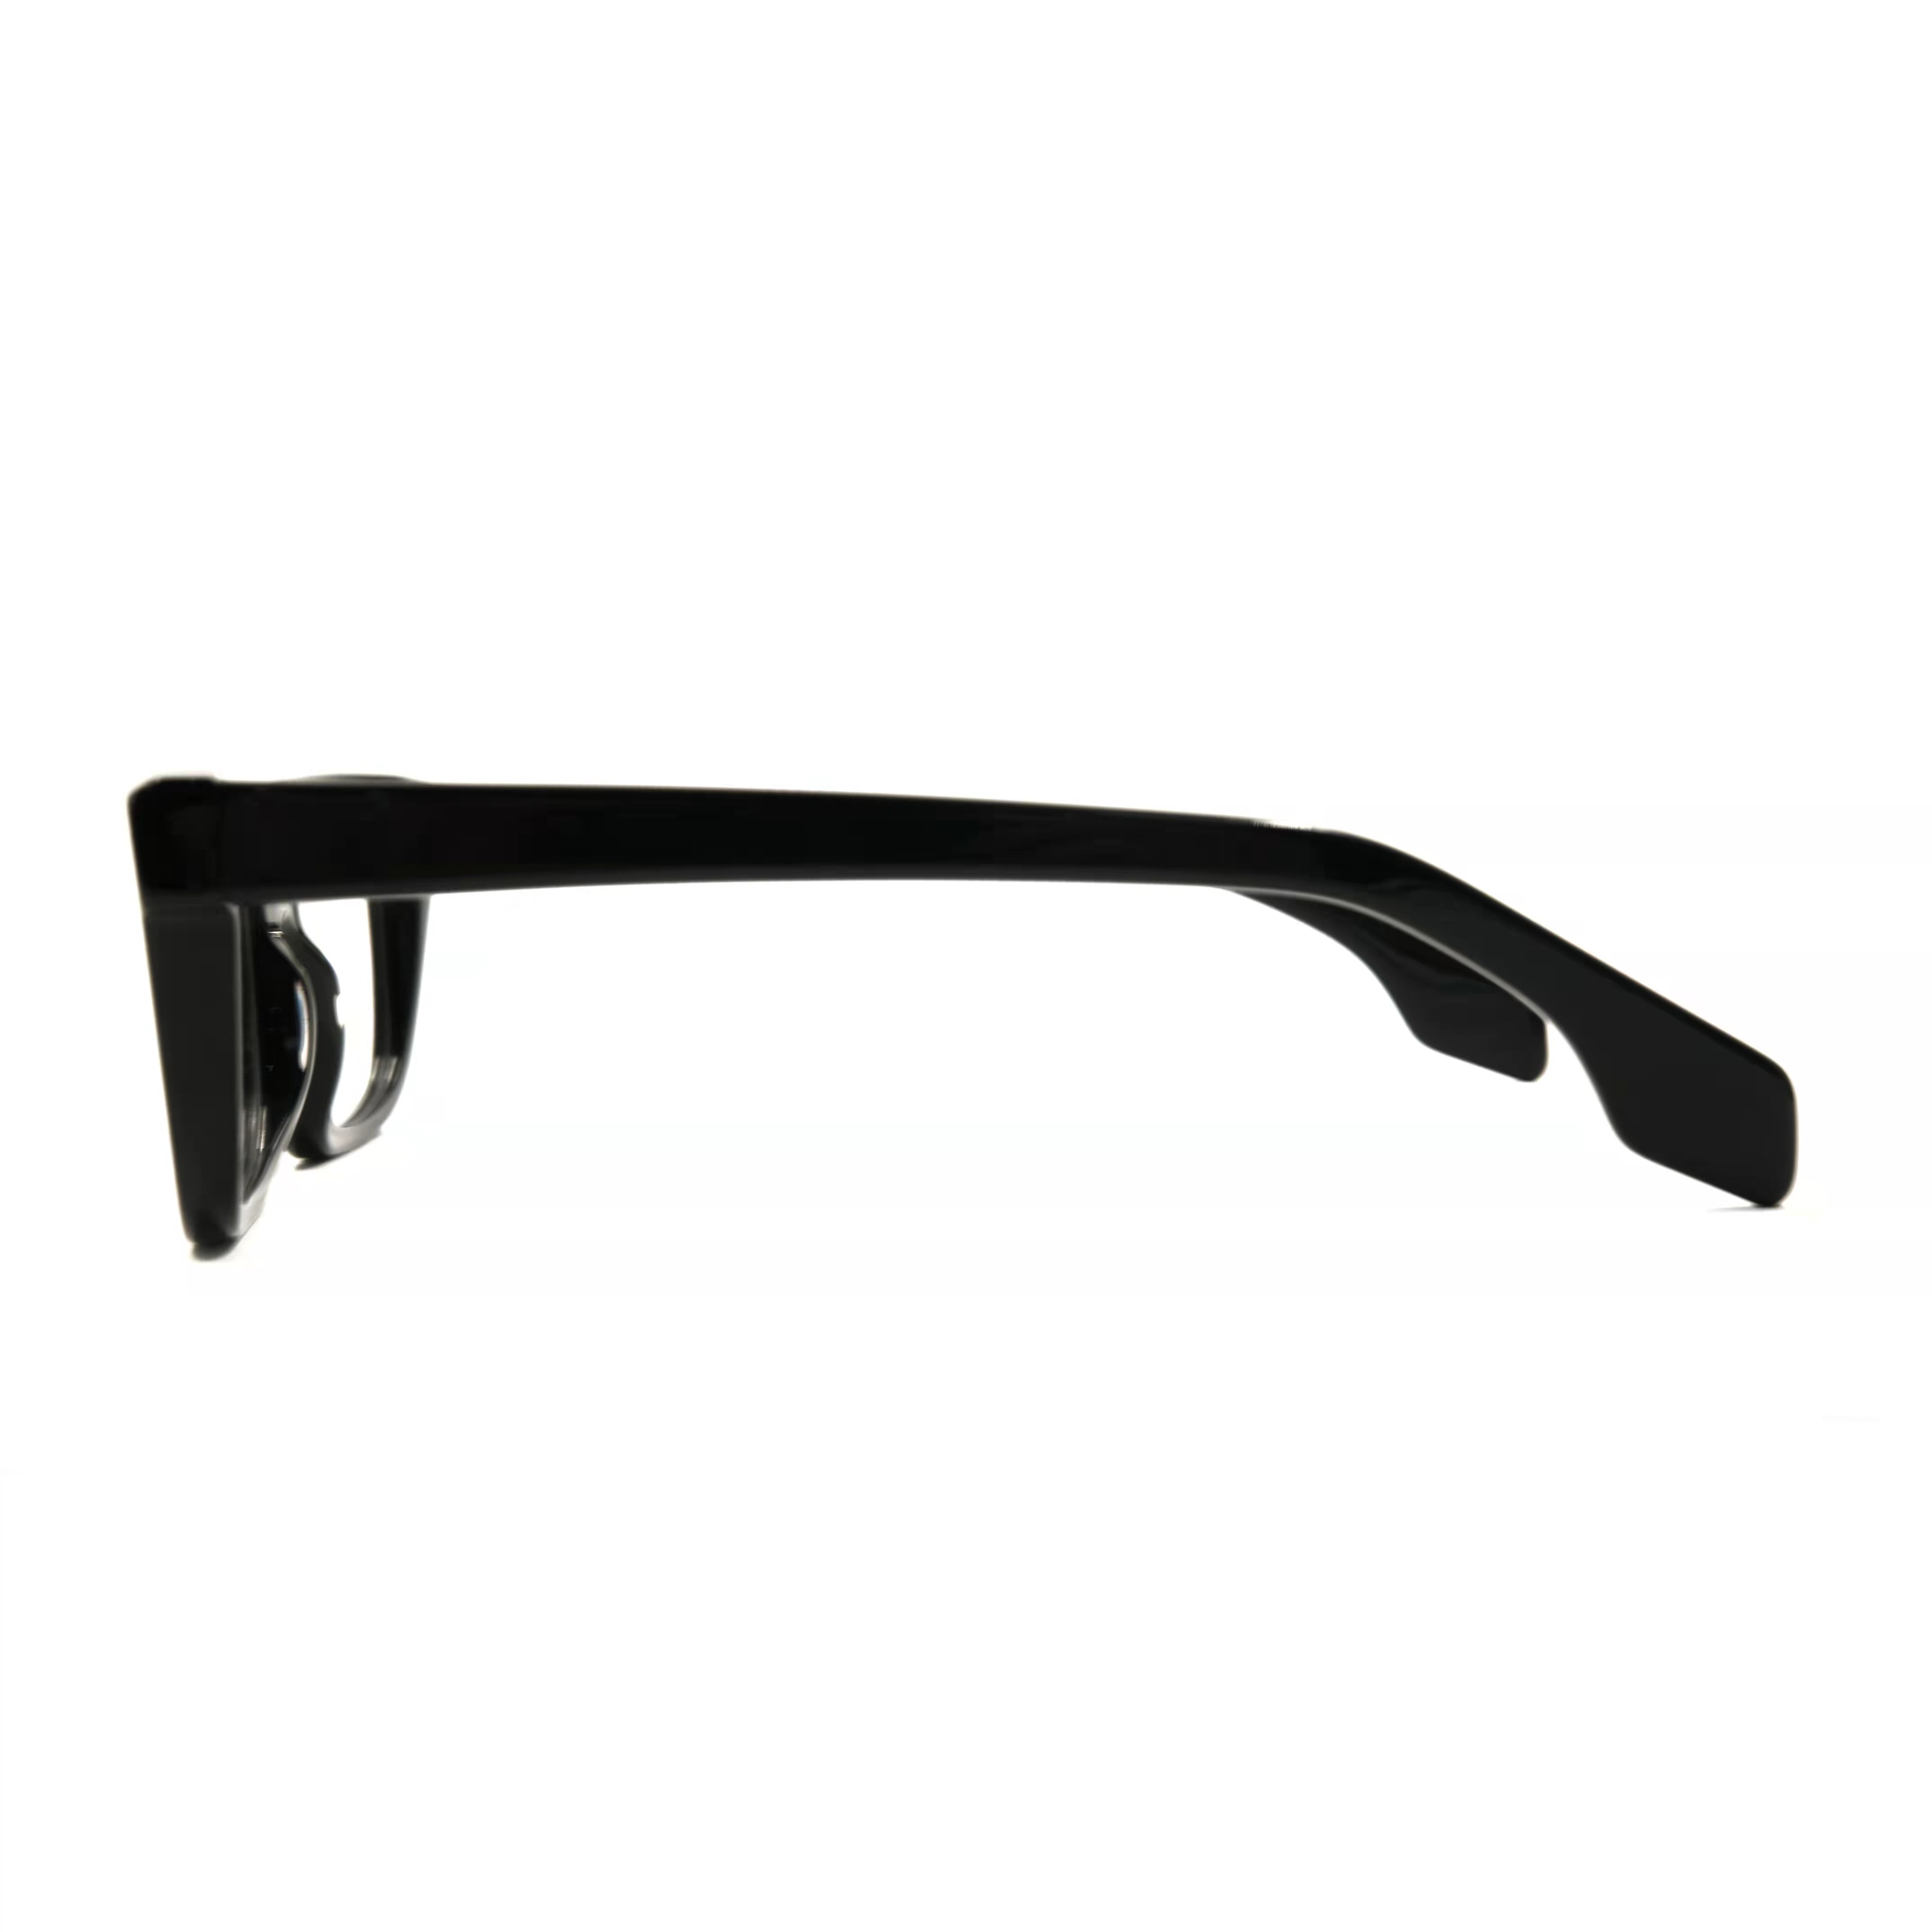 Acetate Square Oversize Frame Sunglasses Best Eyeglass Companies Design Your Own Sunglasses with Logo